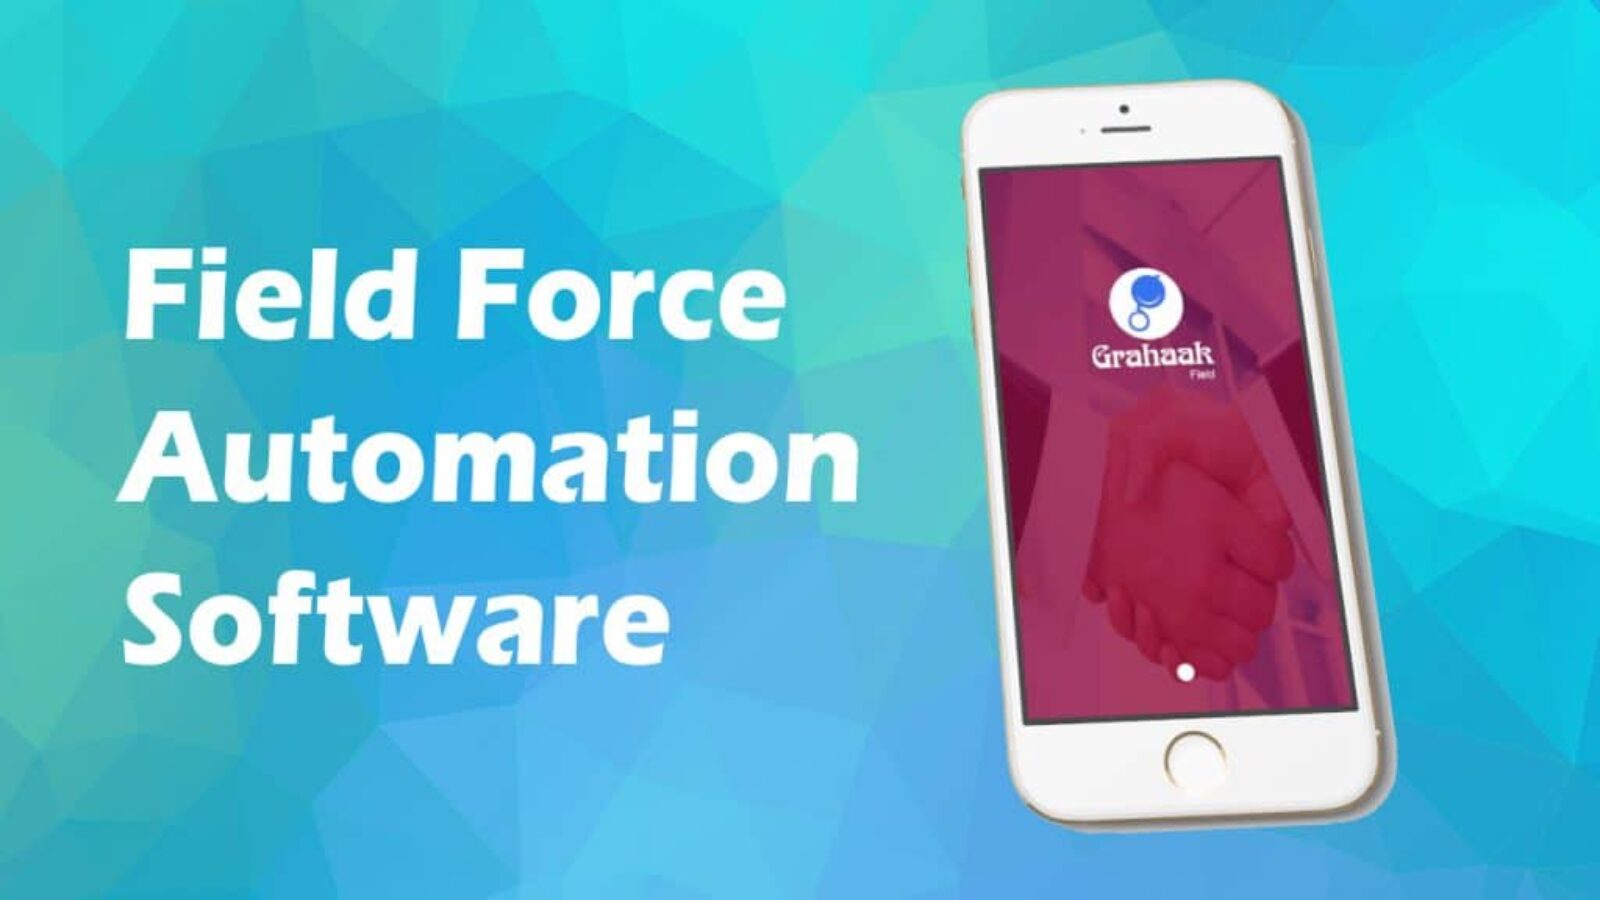 Field Force Automation Software